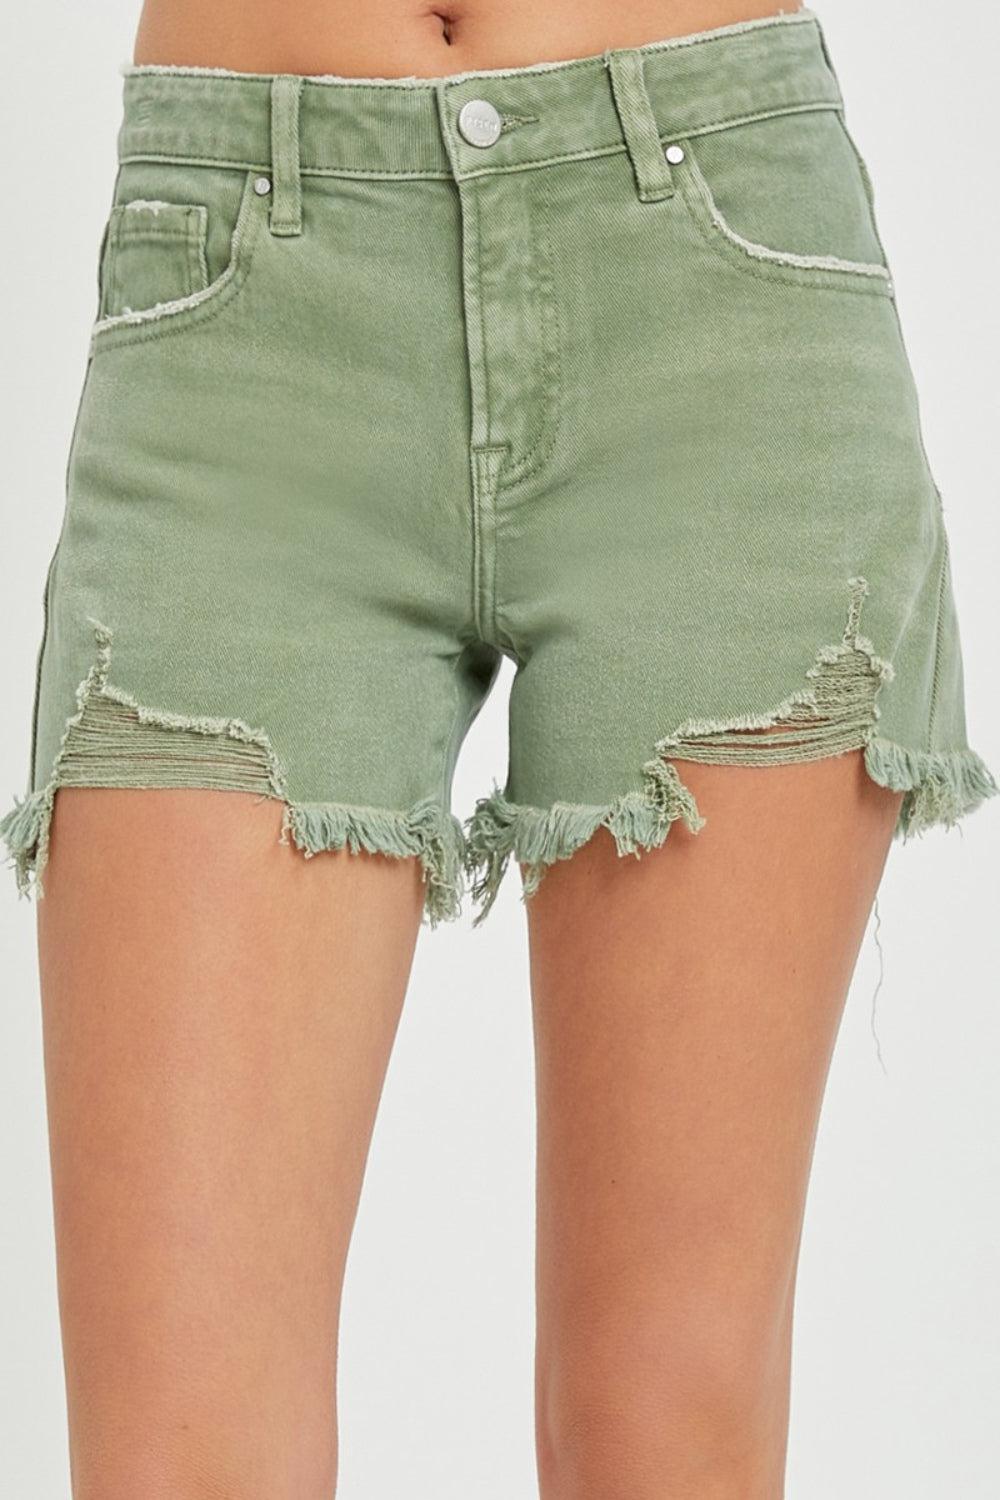 a woman wearing green shorts with holes on the side